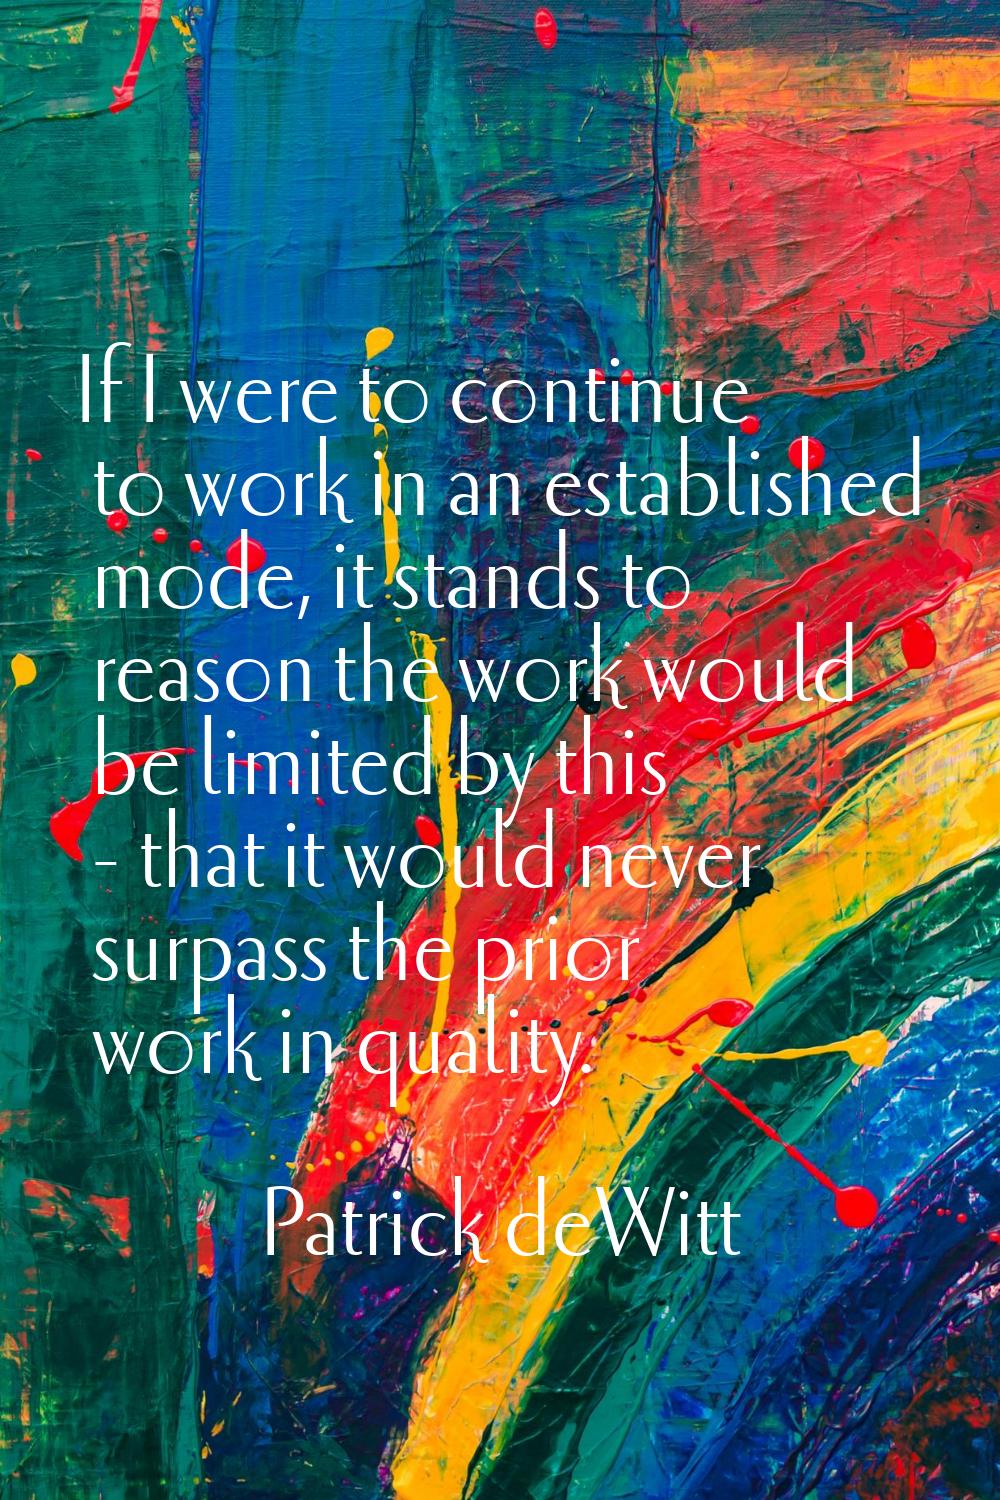 If I were to continue to work in an established mode, it stands to reason the work would be limited